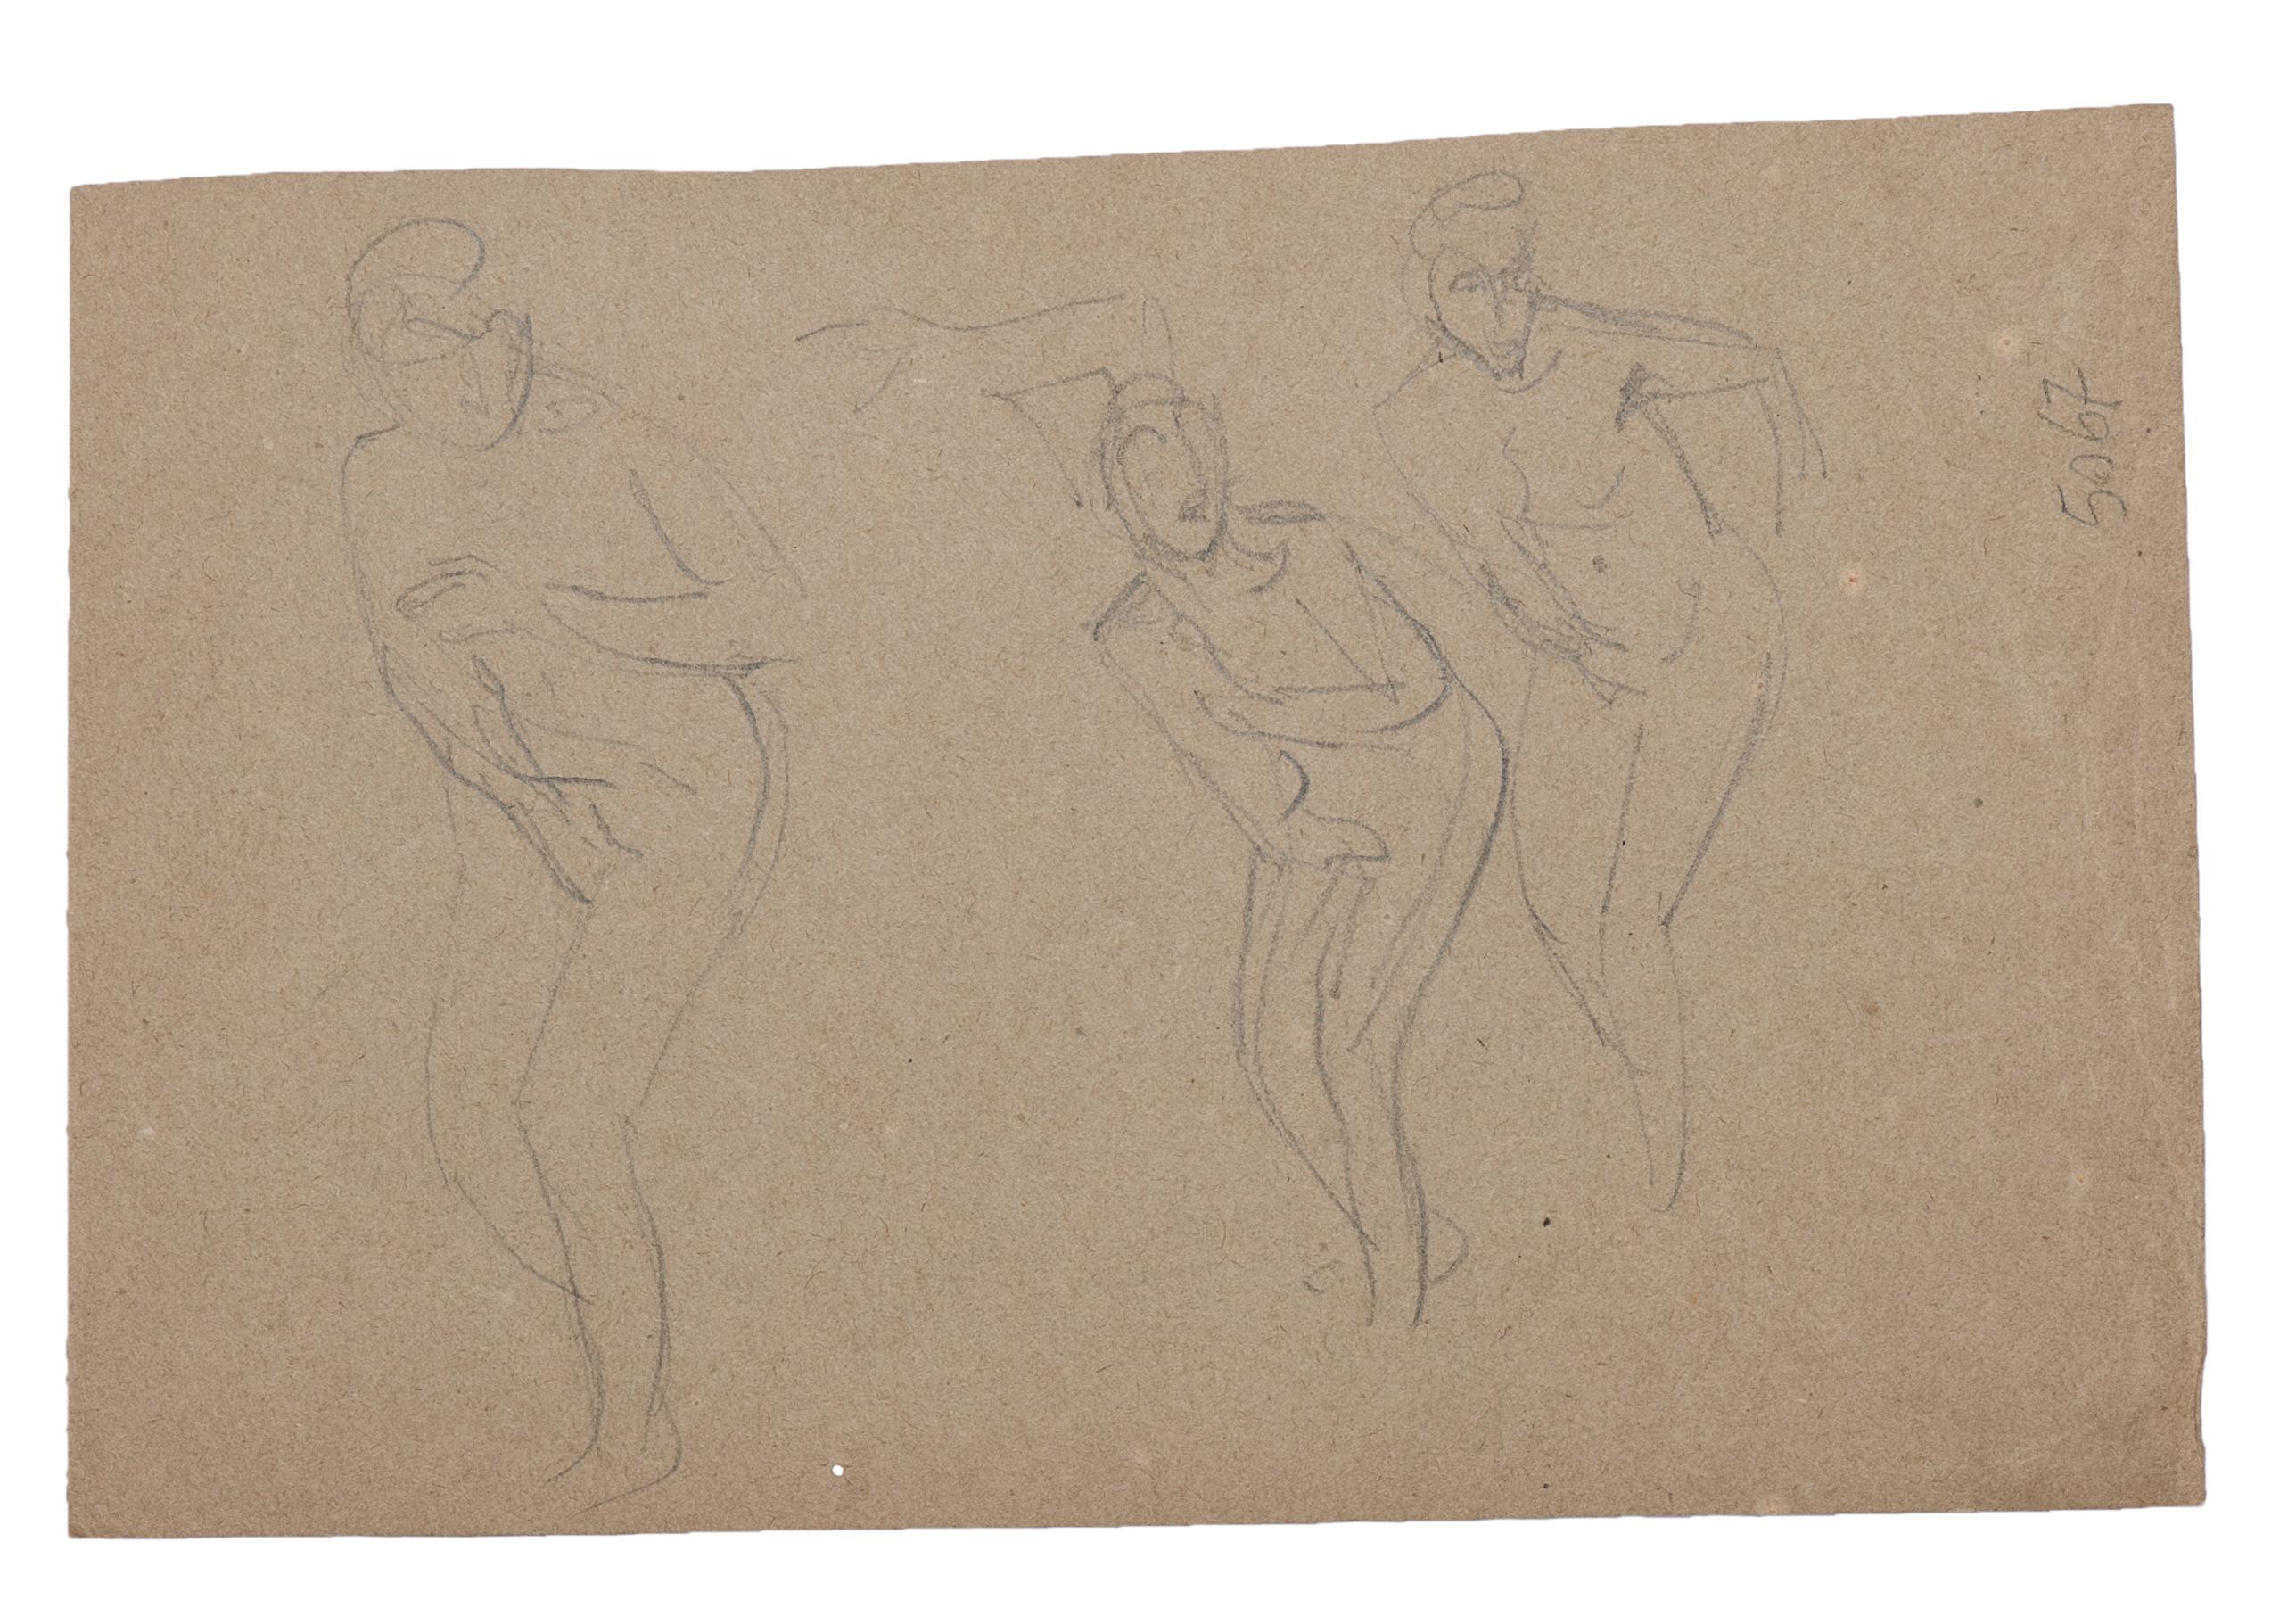 Figures of Women - Original Pencil by Charles Lucien Moulin - Early 20th Century